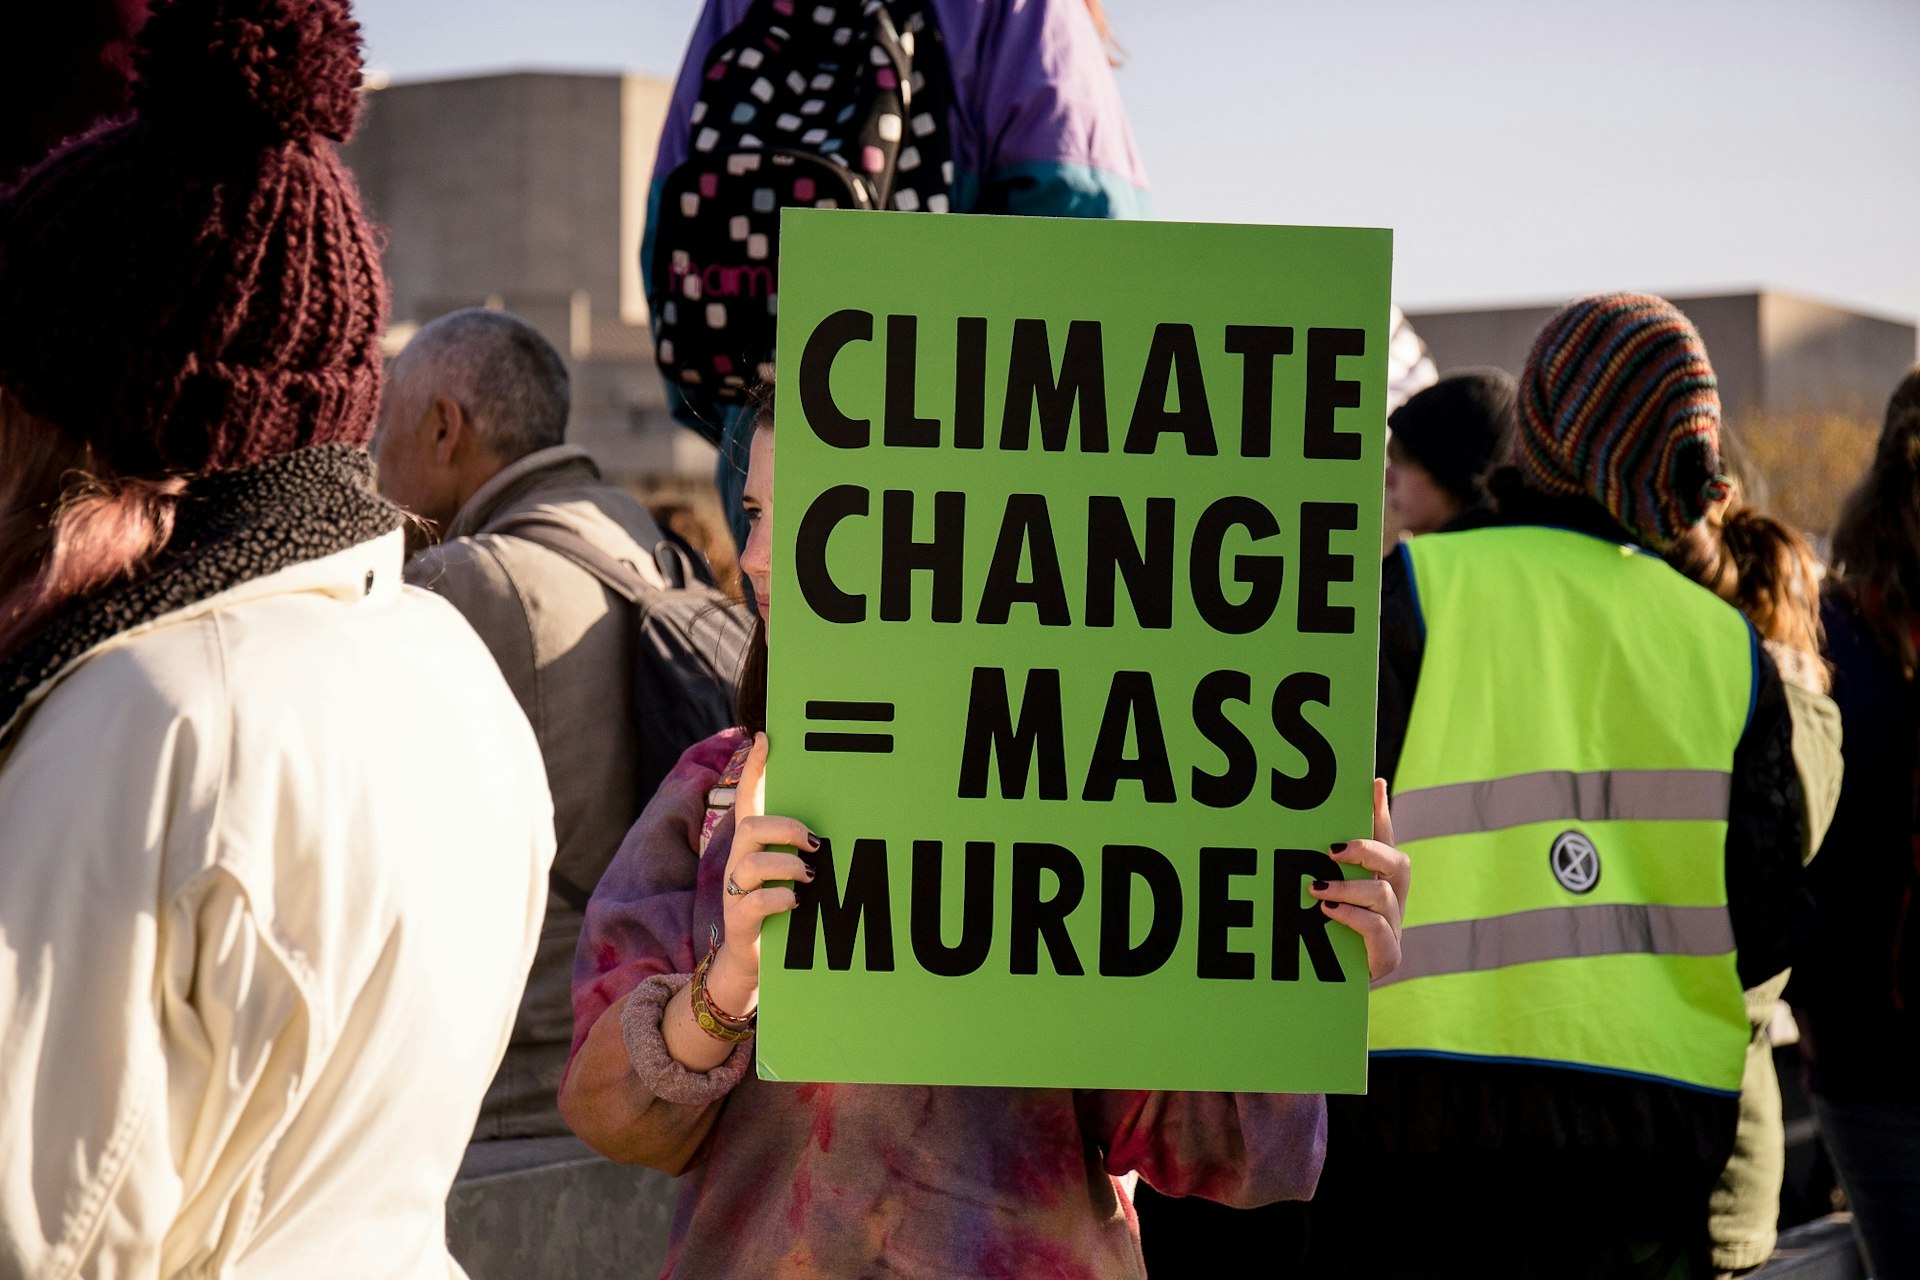 Protestors call for immediate action on climate change